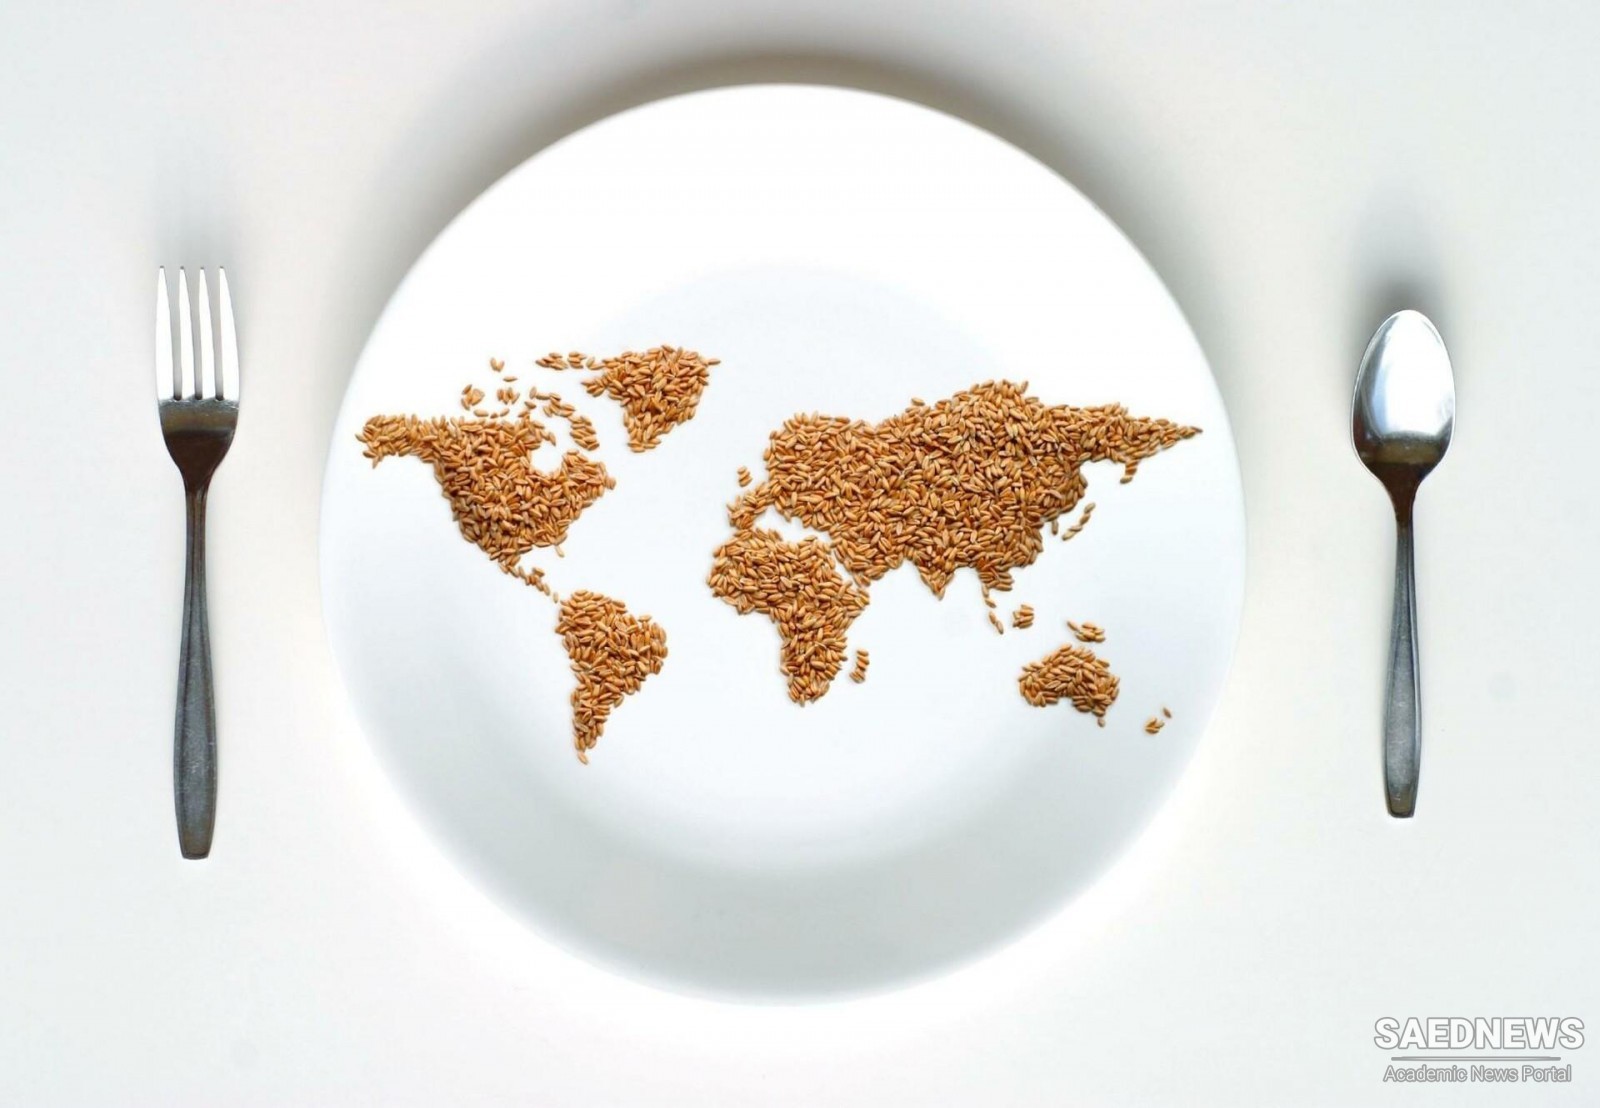 The Ever-Growing Hunger in the World